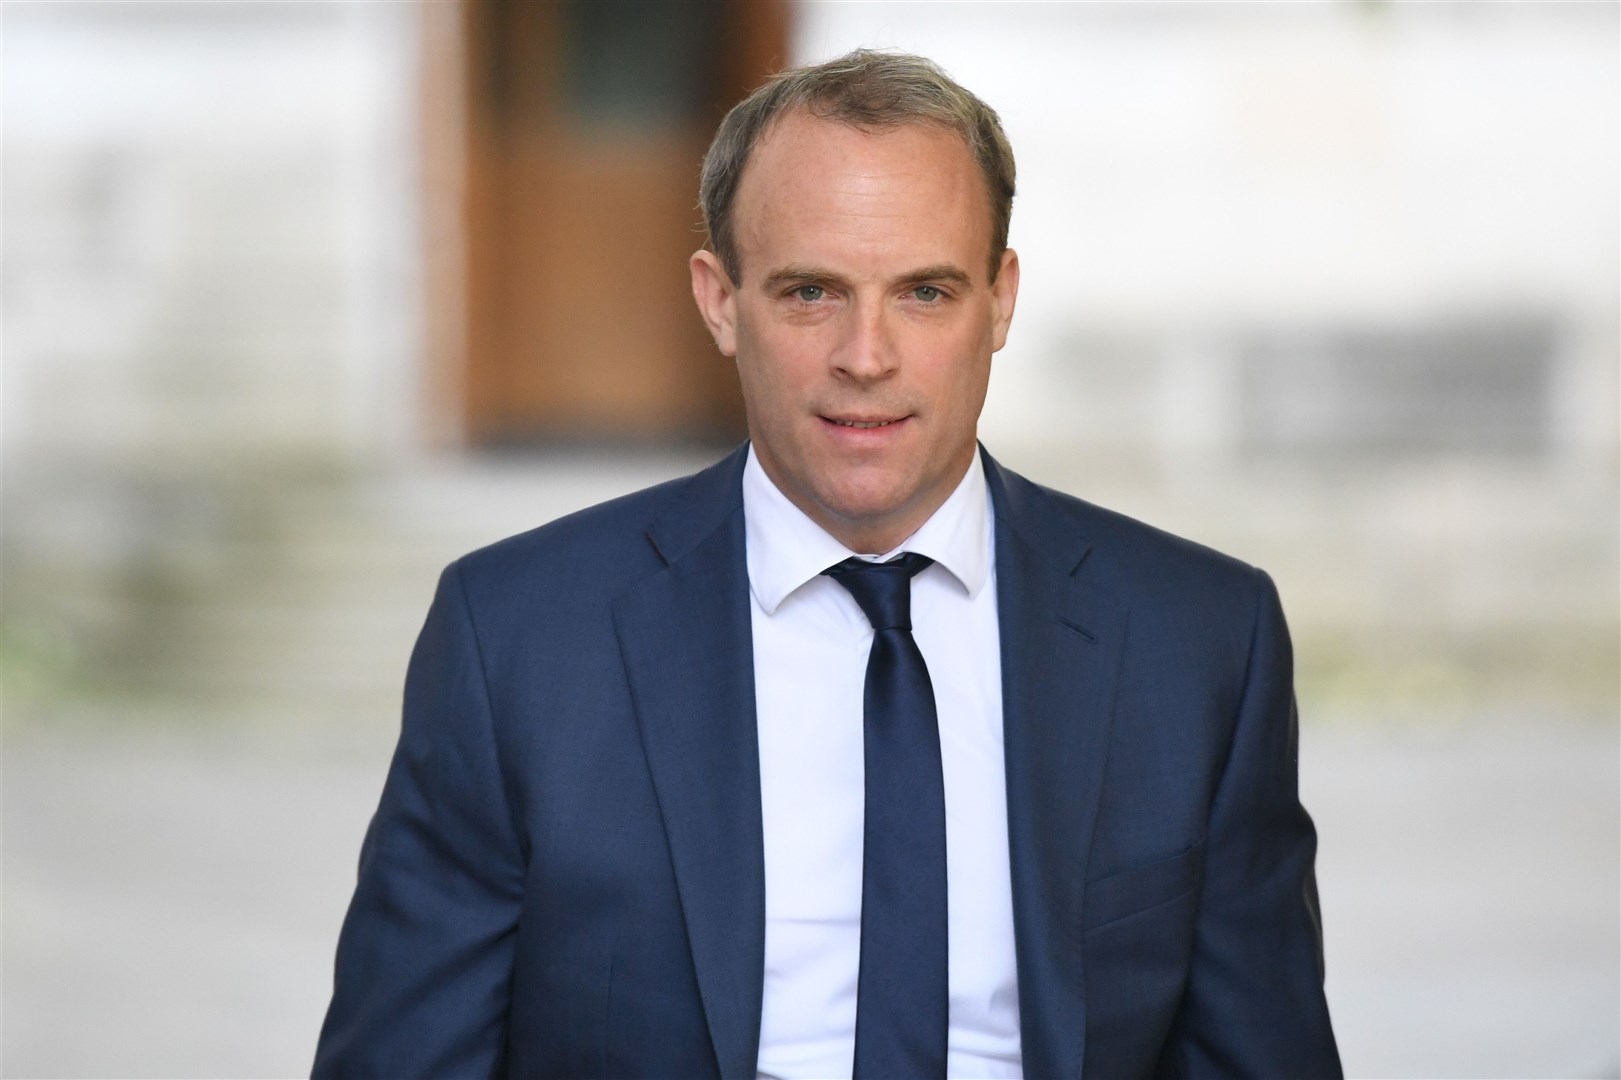 Dominic Raab told Parliament that Anne Sacoolas had diplomatic immunity on October 21 last year (Stefan Rousseau/PA)